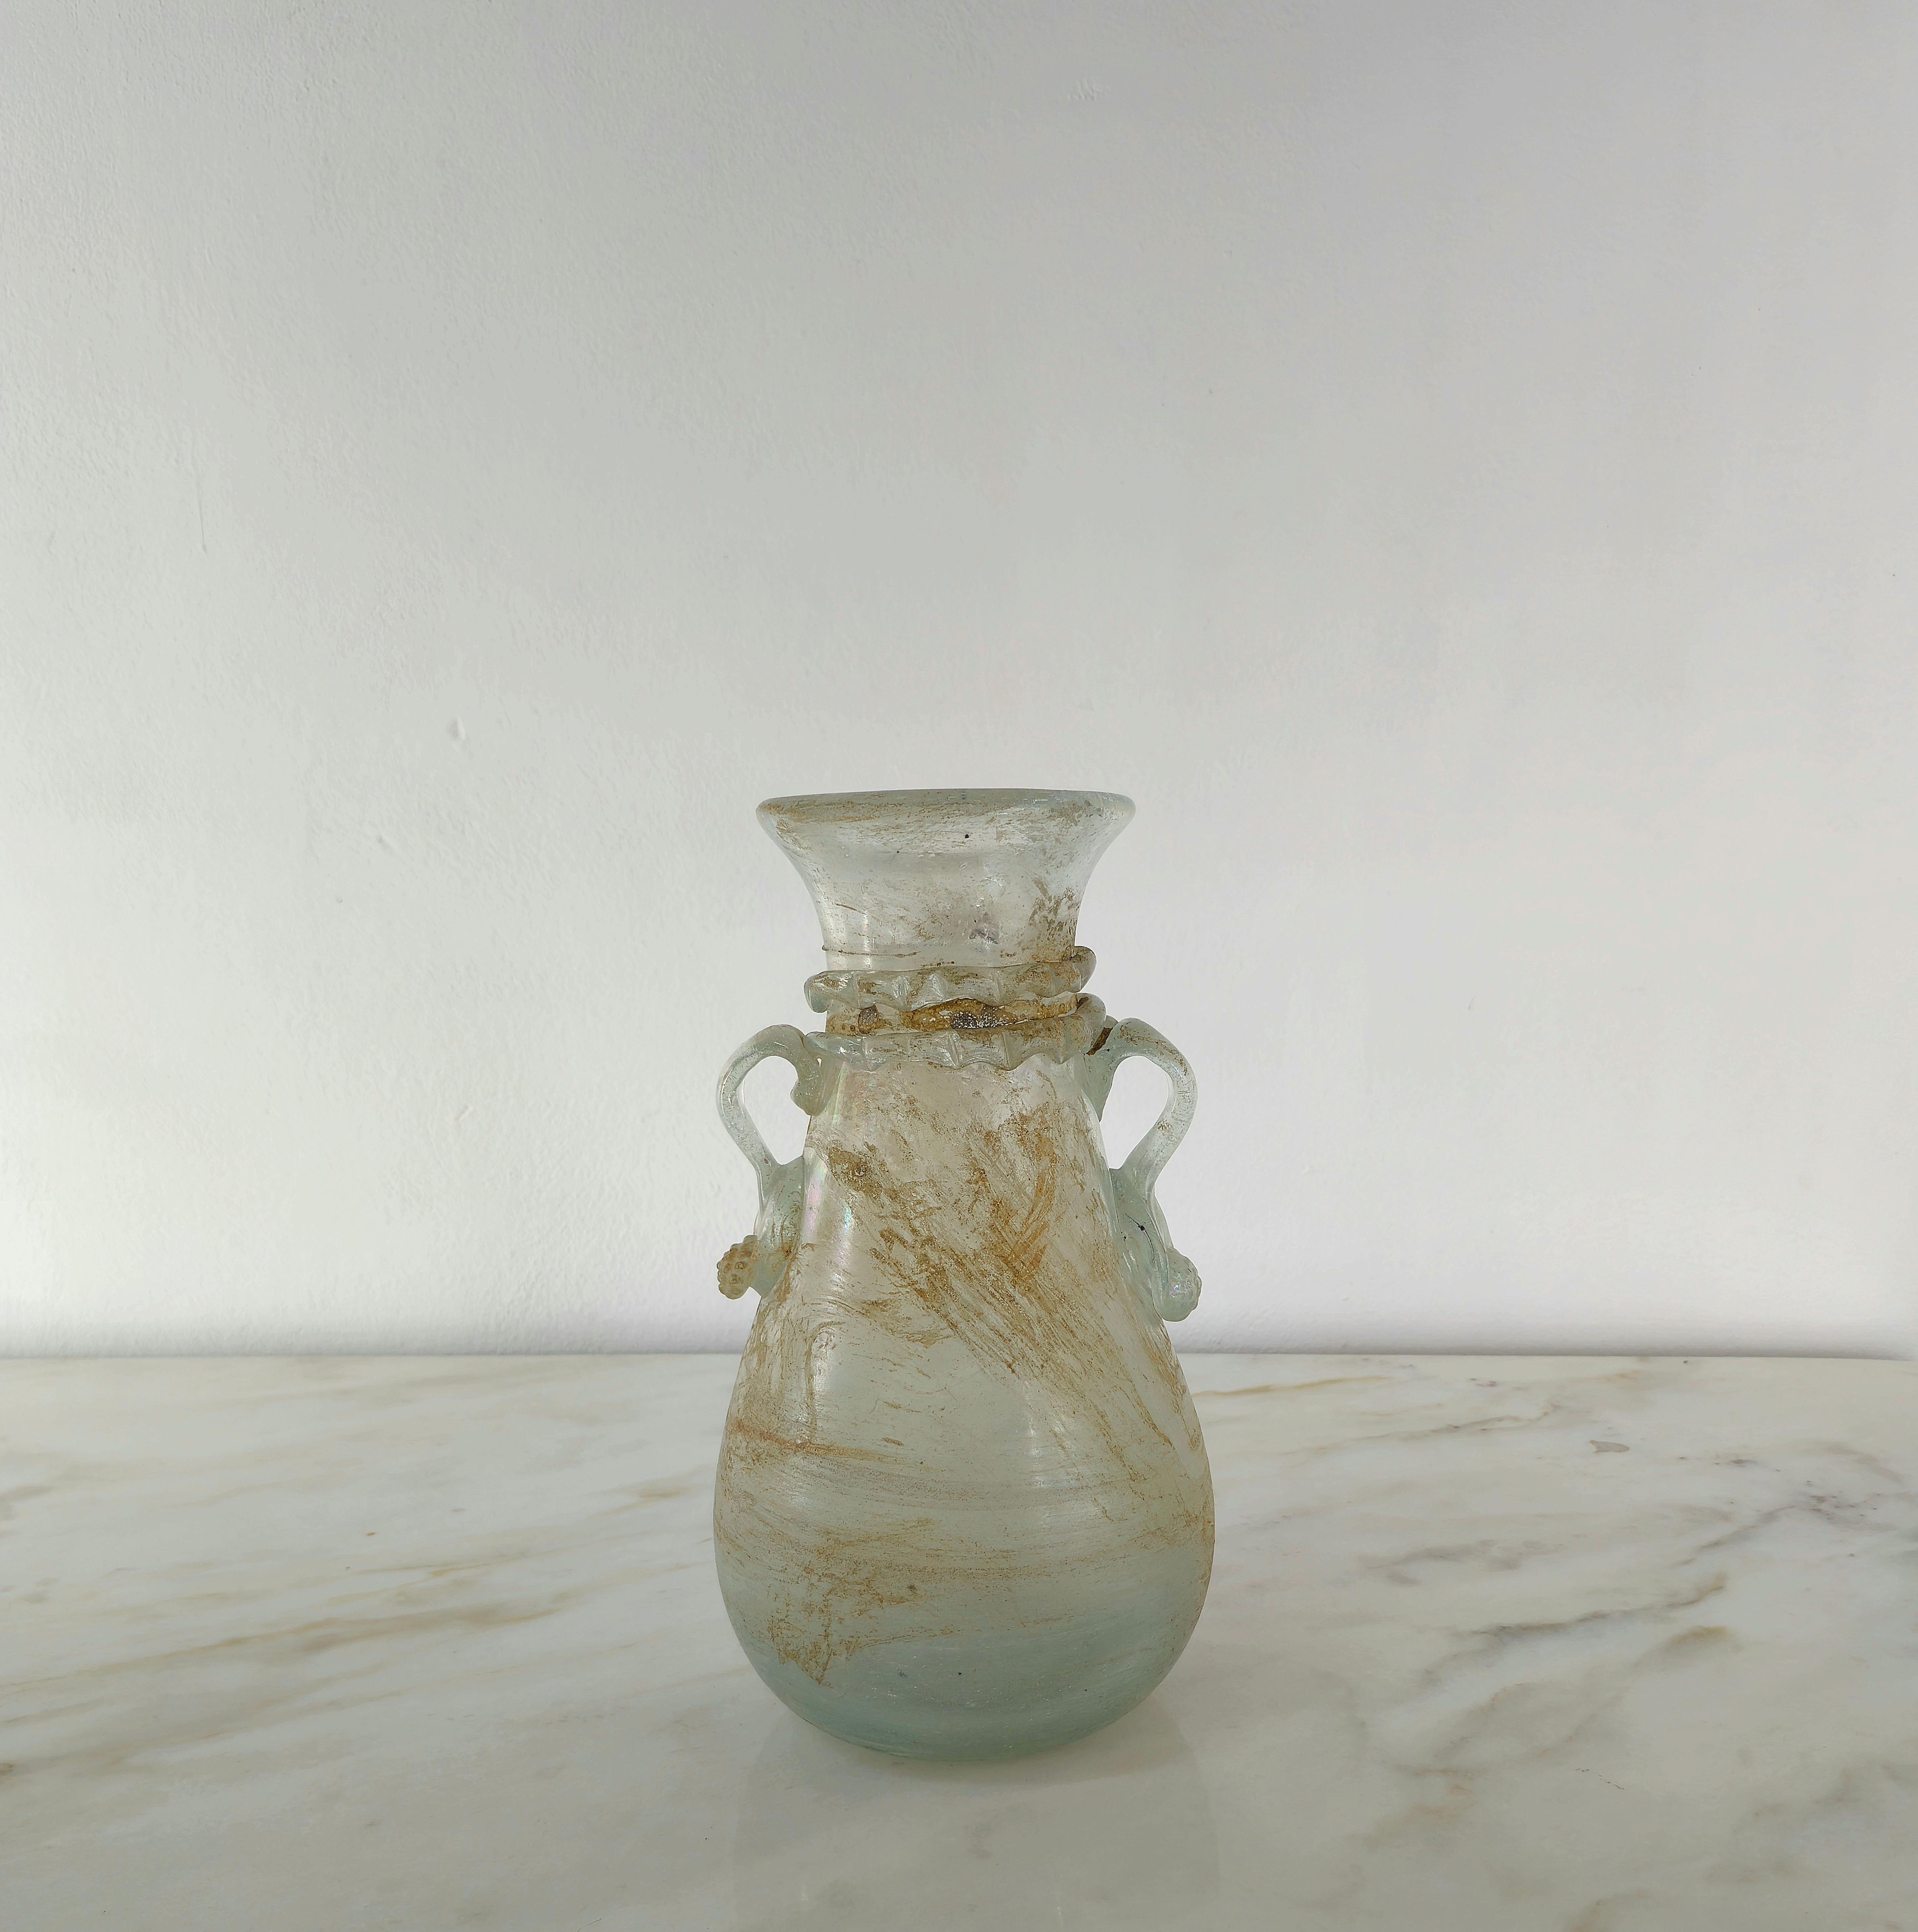 Italian Decorative Object Vase Attributed to Seguso Murano Glass Scavo Midcentury 1960s For Sale